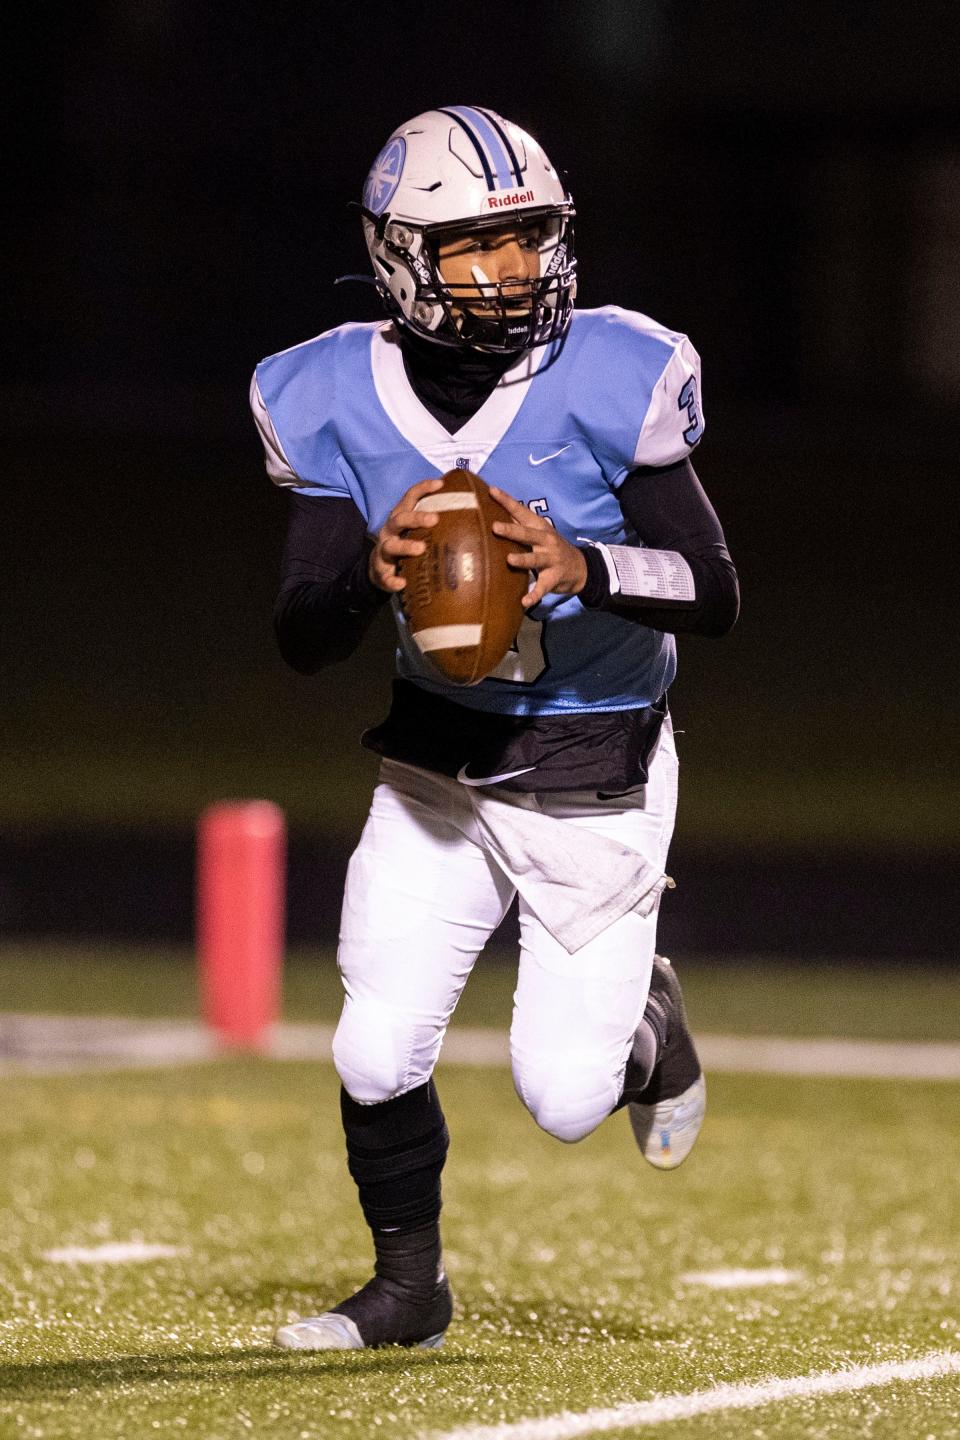 Saint Joseph's Alex Ortiz (3) passes the ball during the Northwood-South Bend Saint Joseph high school football game on Friday, October 28, 2022, at Father Bly Field in South Bend, Indiana.